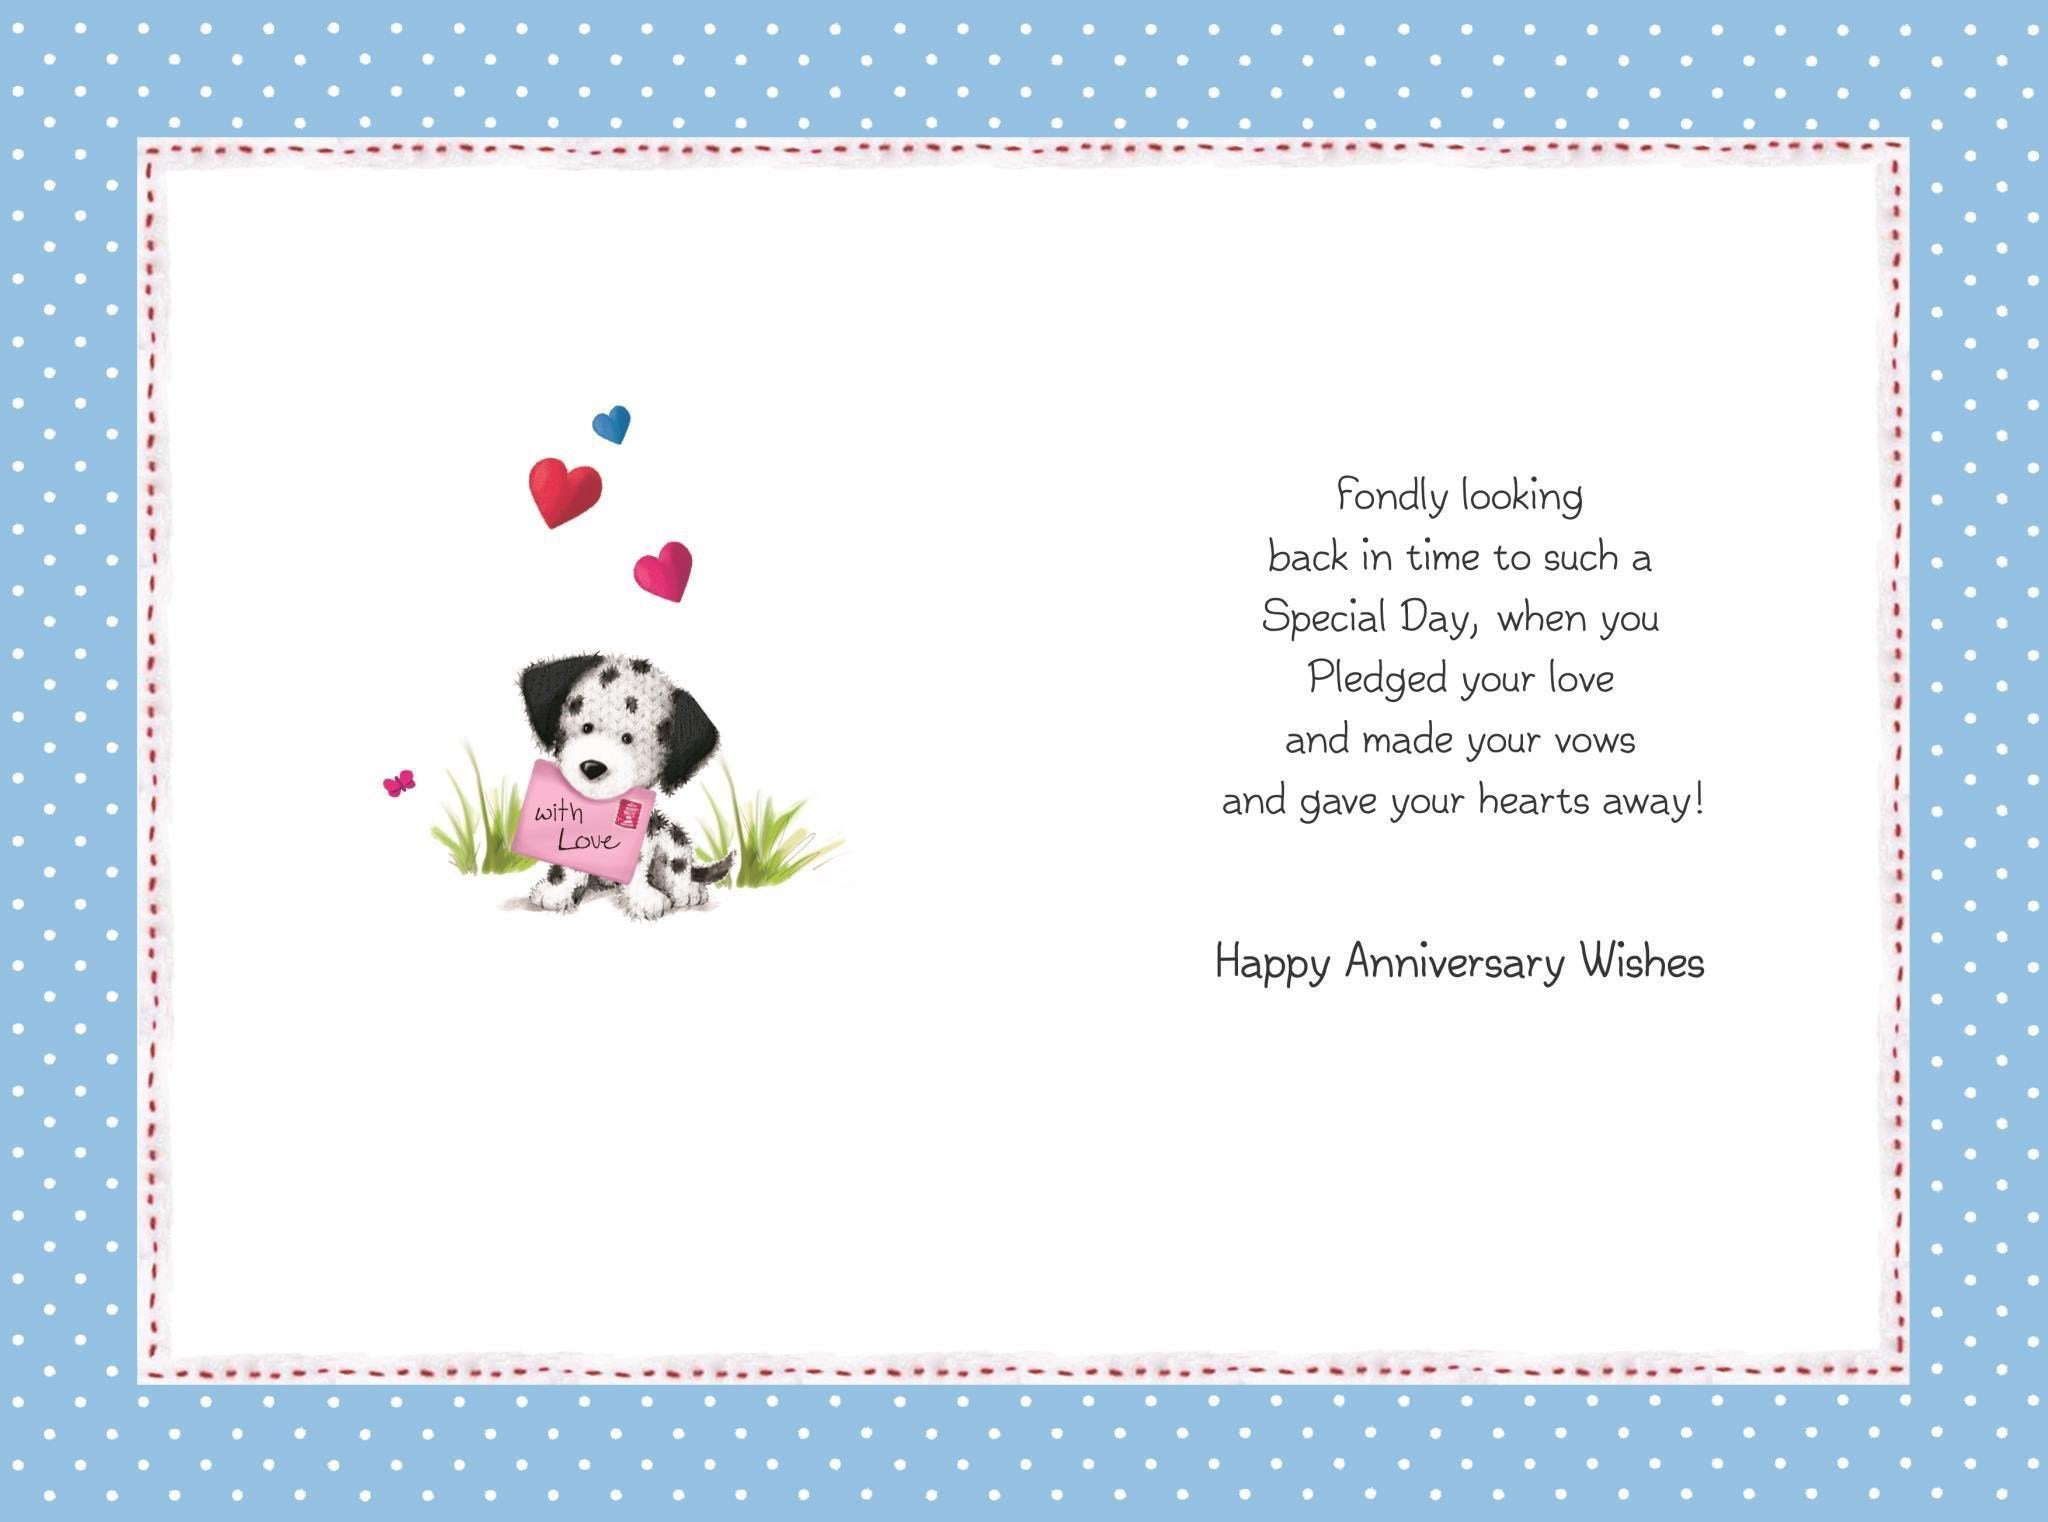 Inside of Son & Daughter in Law Anniversary Greetings Card